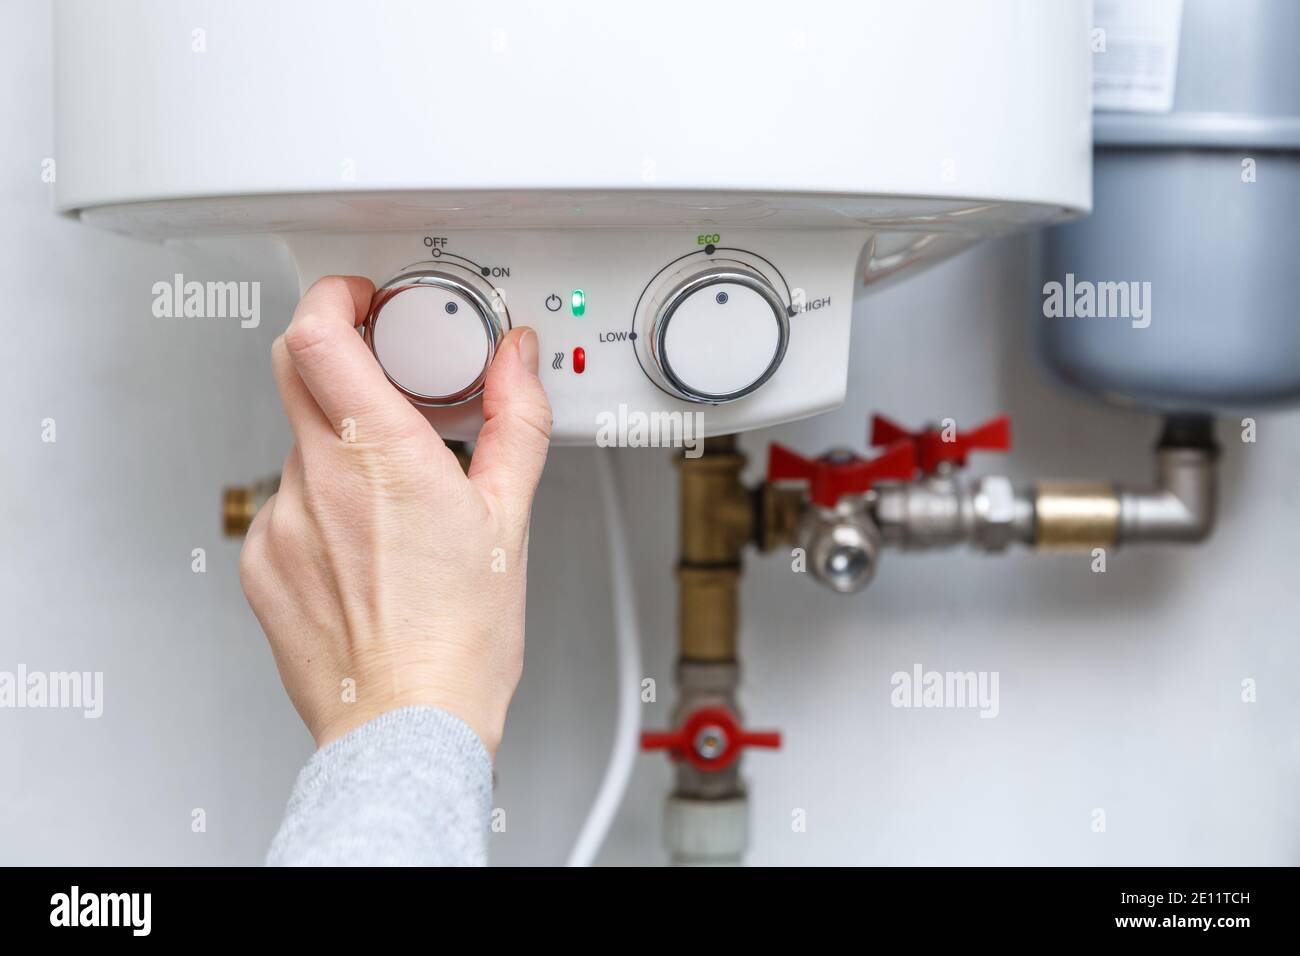 Female hand turning on electric water heater (boiler). Household enegry saving equipment Stock Photo